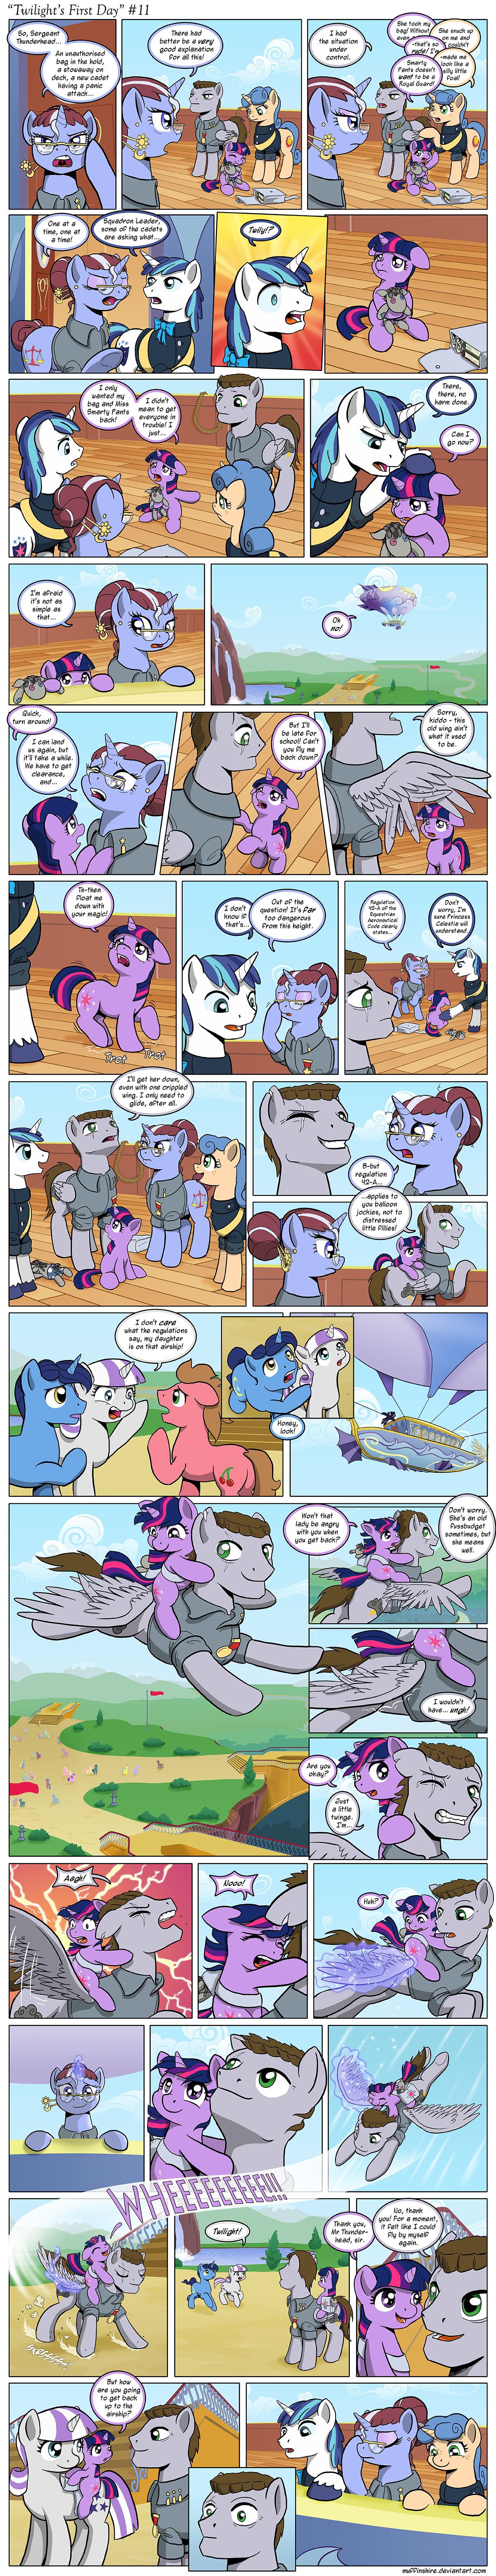 [Muffinshire] Twilight's First Day (My Little Pony: Friendship is Magic) [English] 11